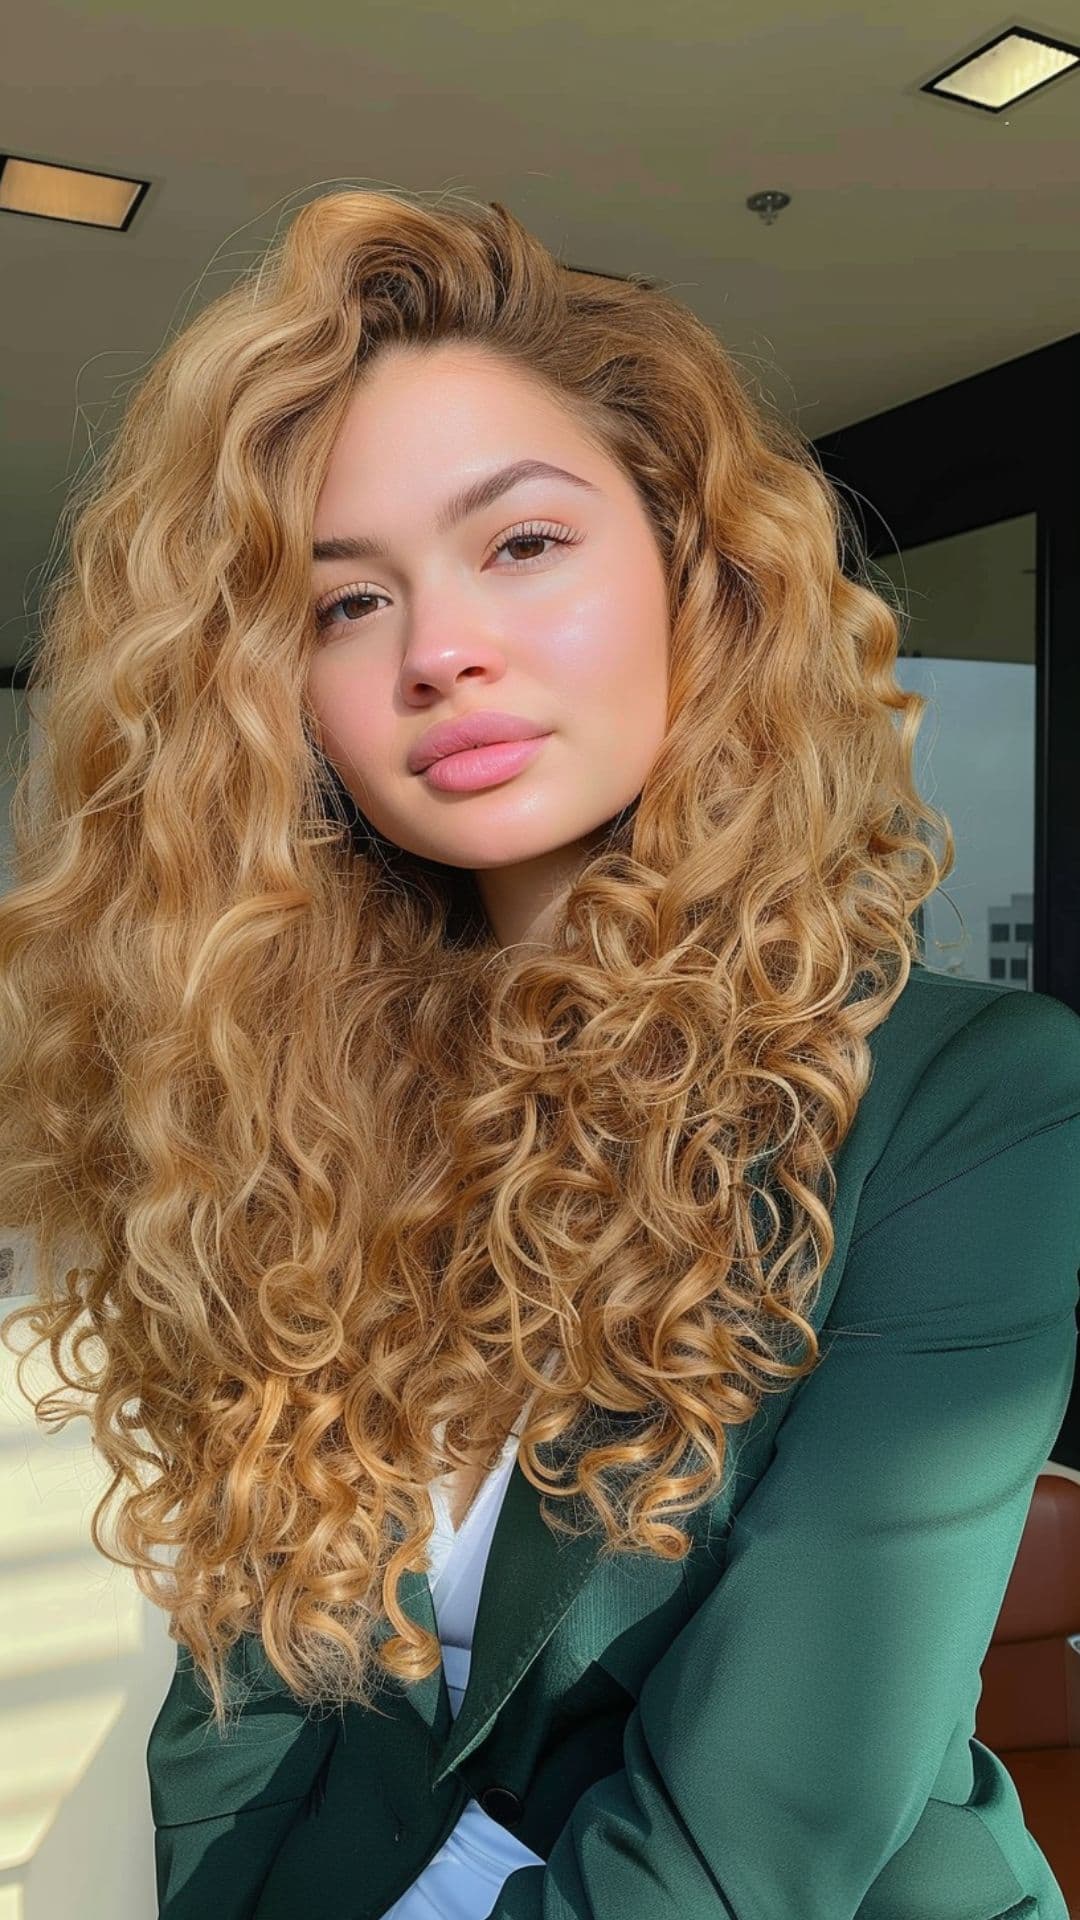 A woman modelling a golden blonde curly hair.